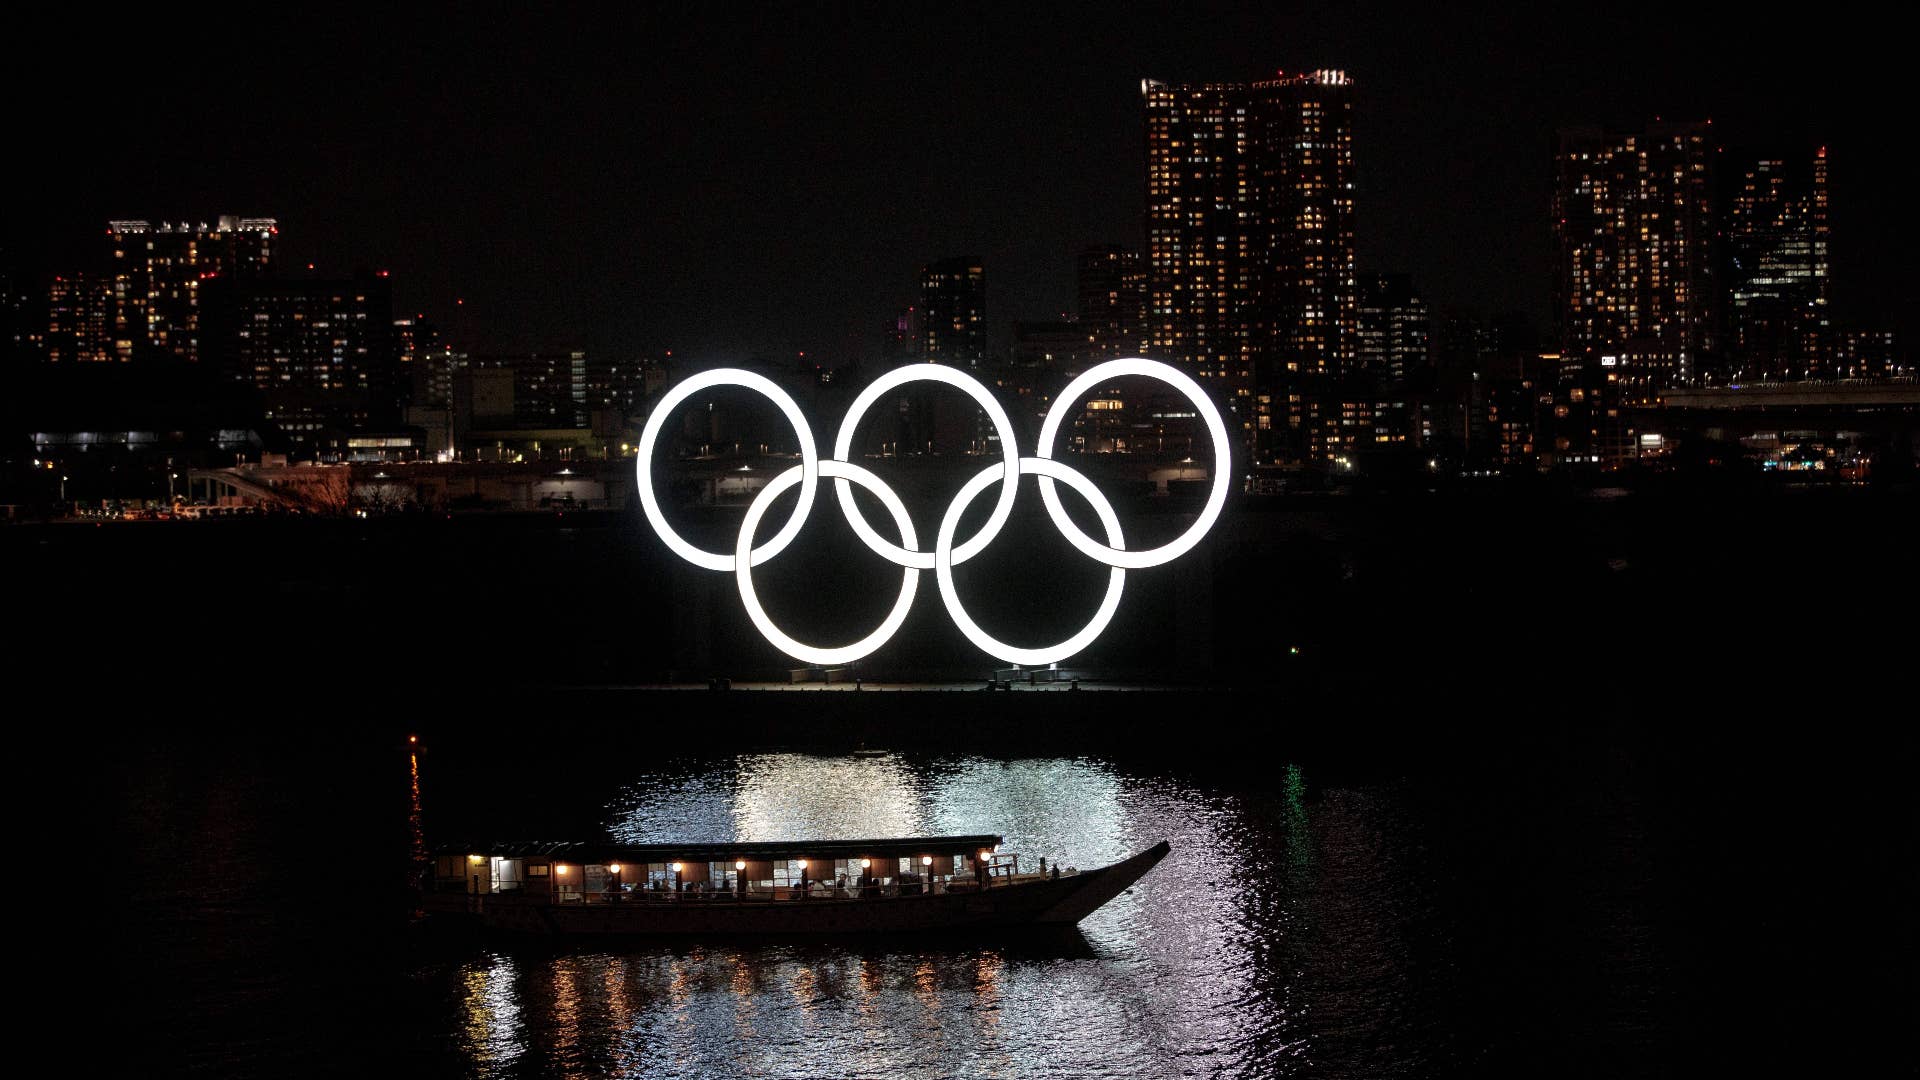 The Olympic rings are seen at Tokyo's Odaiba district.